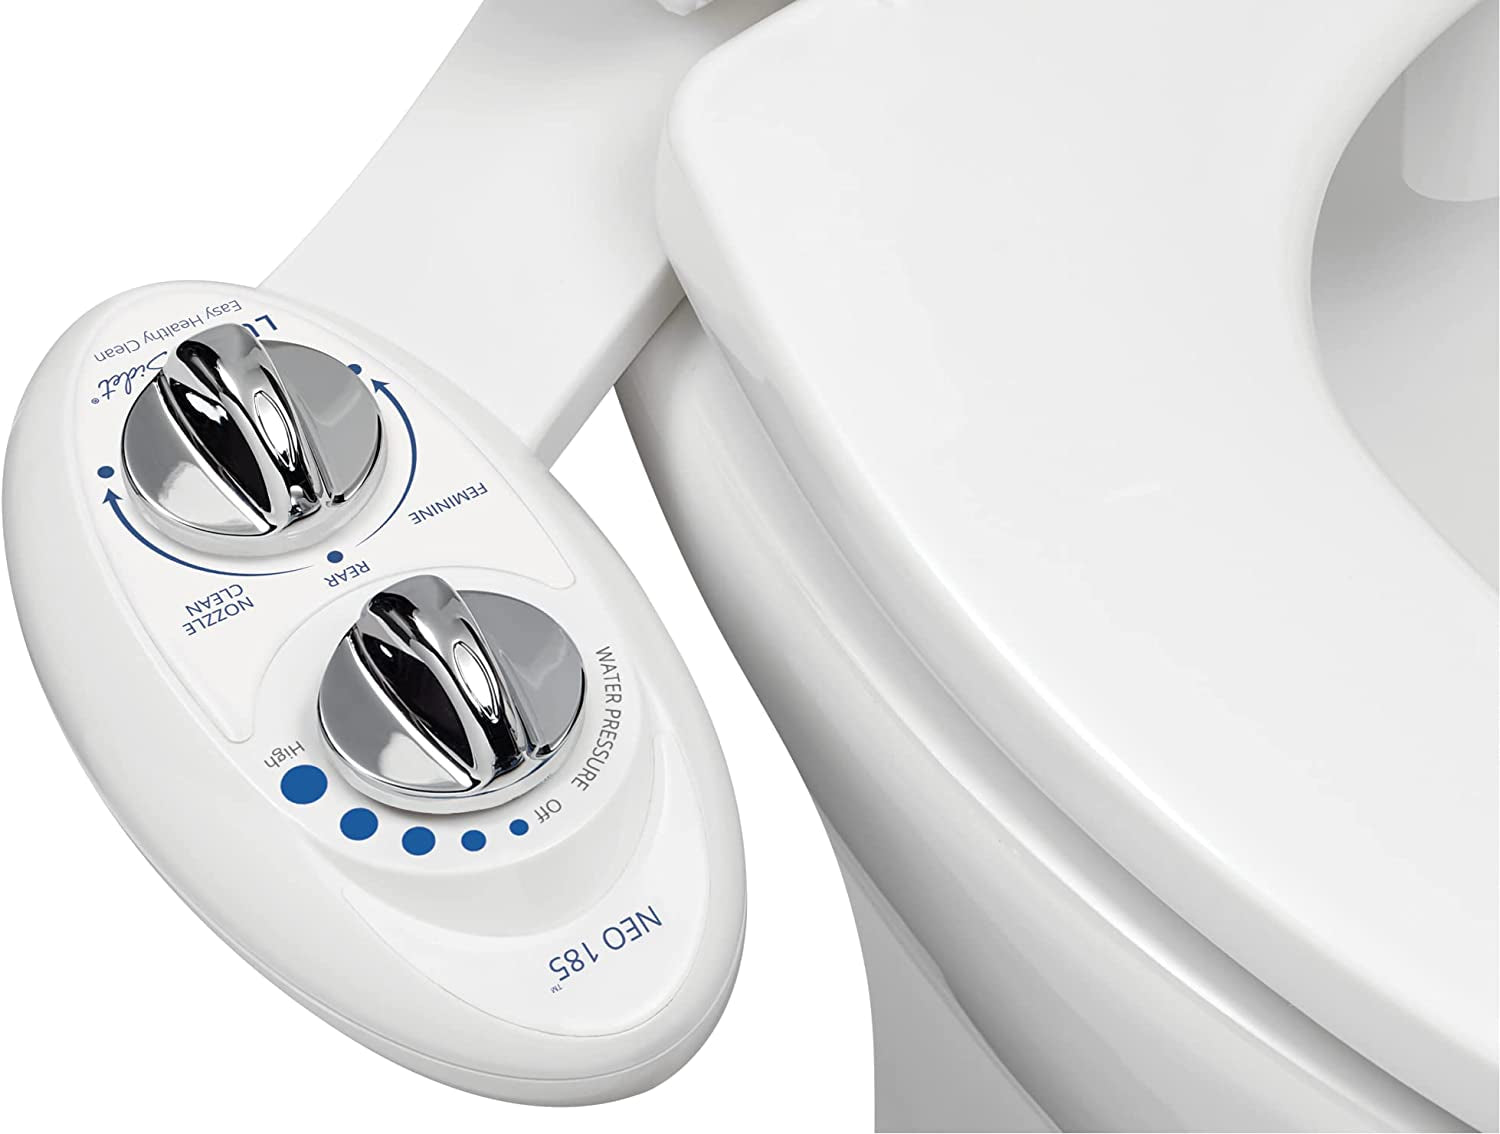 LUXE Bidet, LUXE Bidet Neo 185 (Elite) Non-Electric Bidet Toilet Attachment W/Self-Cleaning Dual Nozzle and Easy Water Pressure Adjustment for Sanitary and Feminine Wash (White and White)